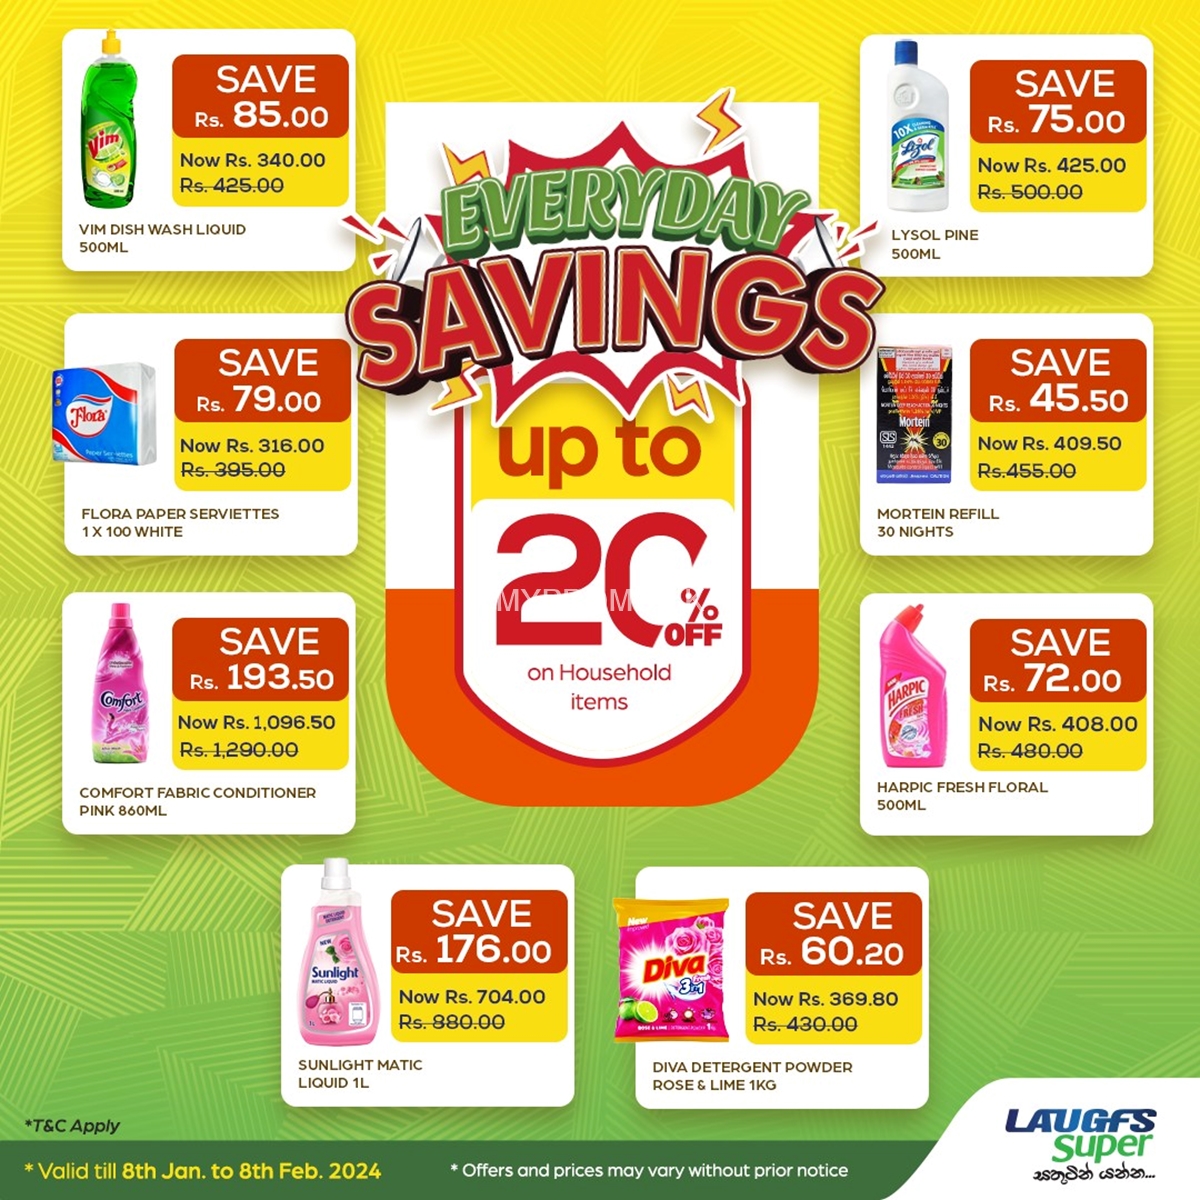 Up to 20% Off on Household Items at LAUGFS Supermarket